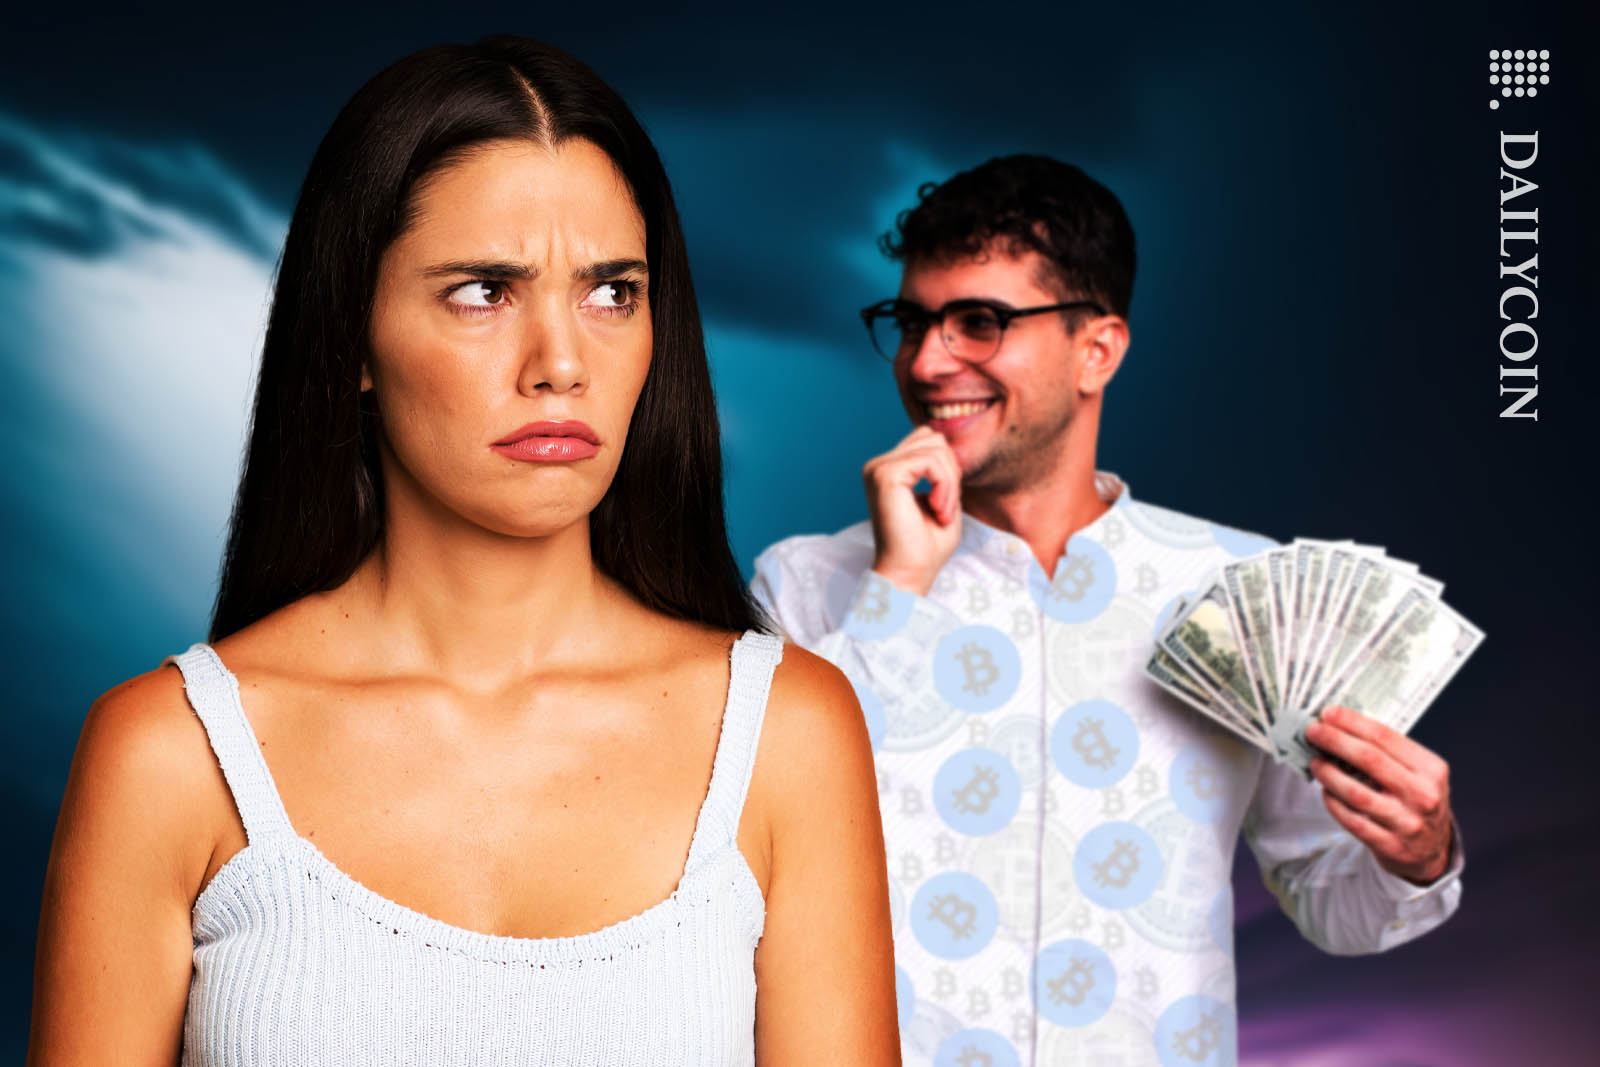 Woman looking angry whilst a crypto influencer smiling behind her with a bunch of cash in his hand.